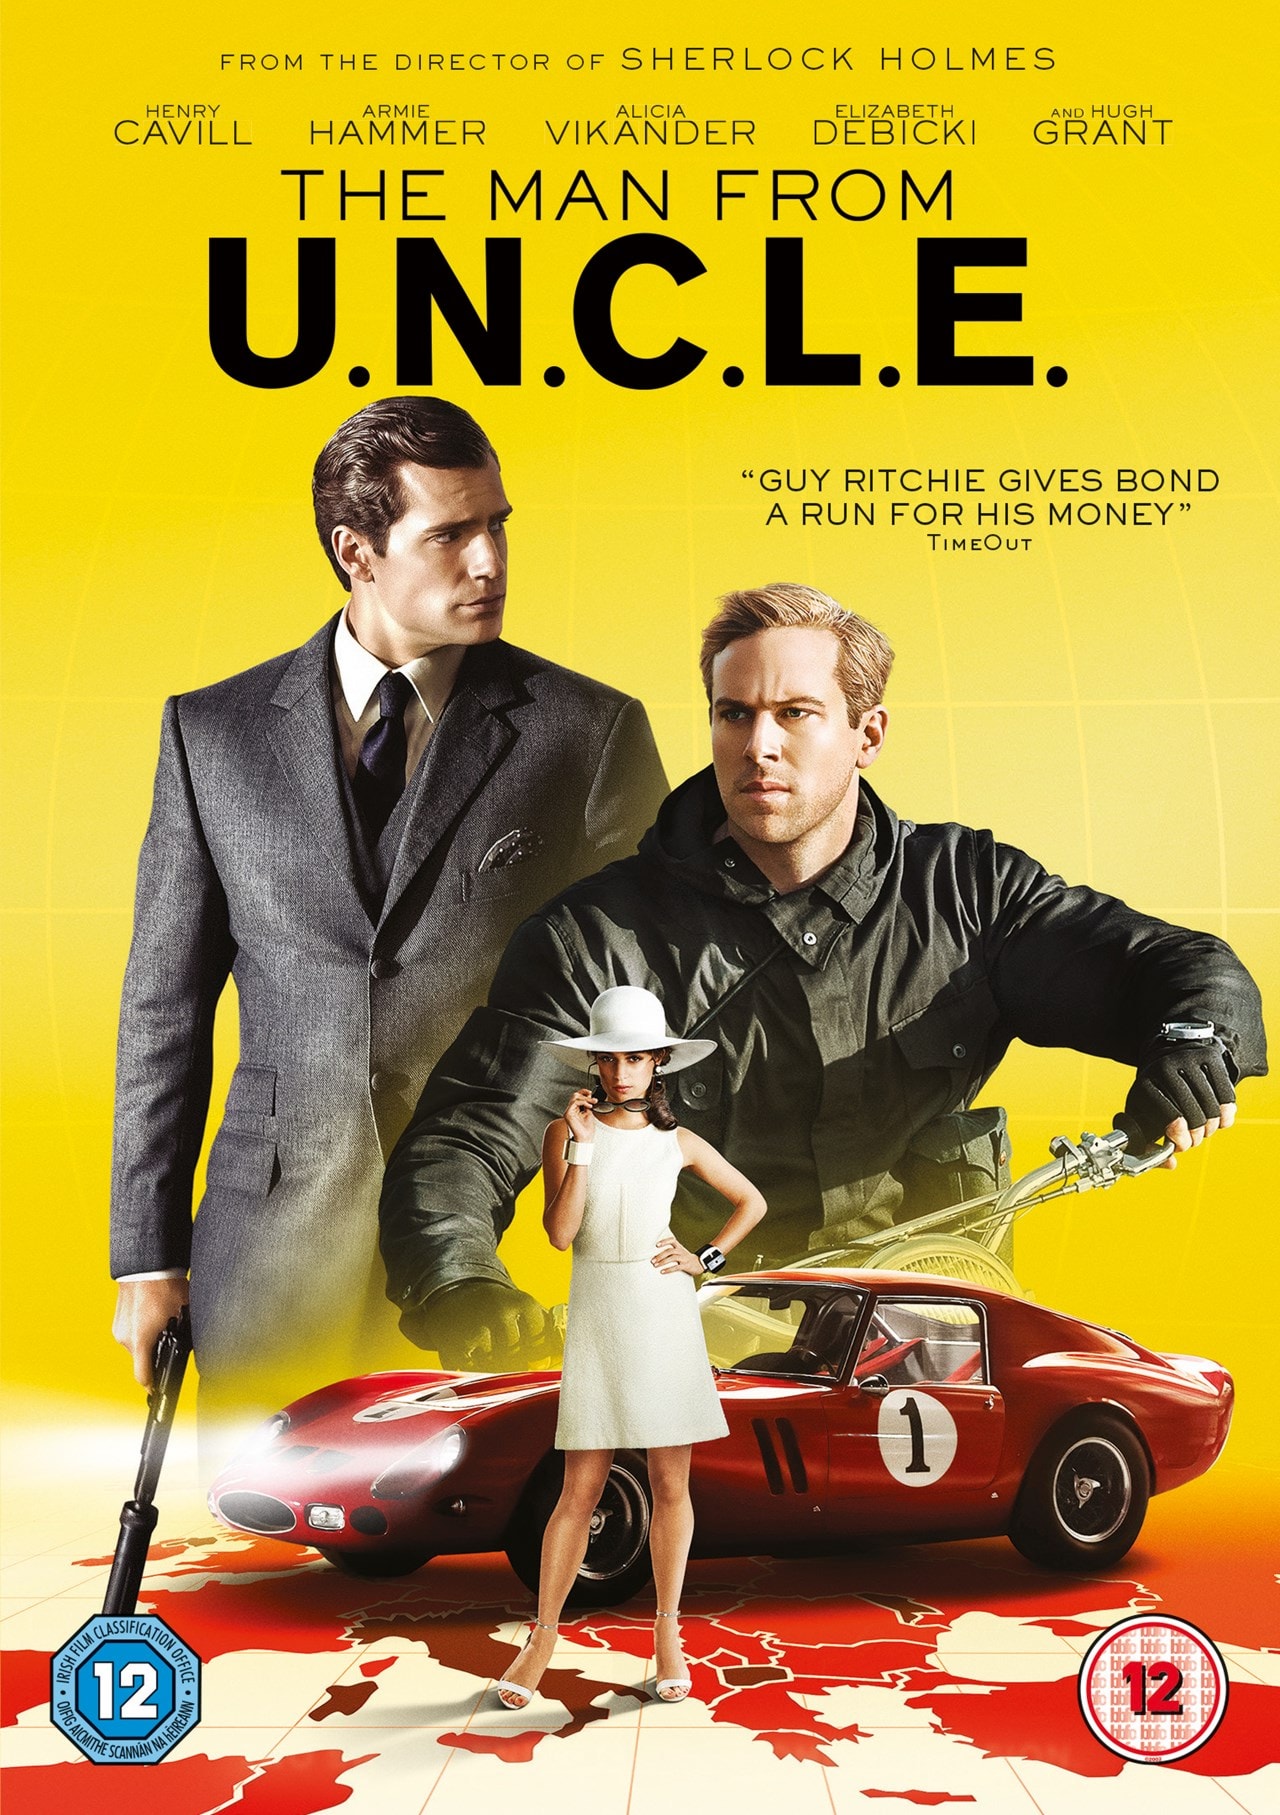 The Man from U.N.C.L.E. | DVD | Free shipping over £20 ...